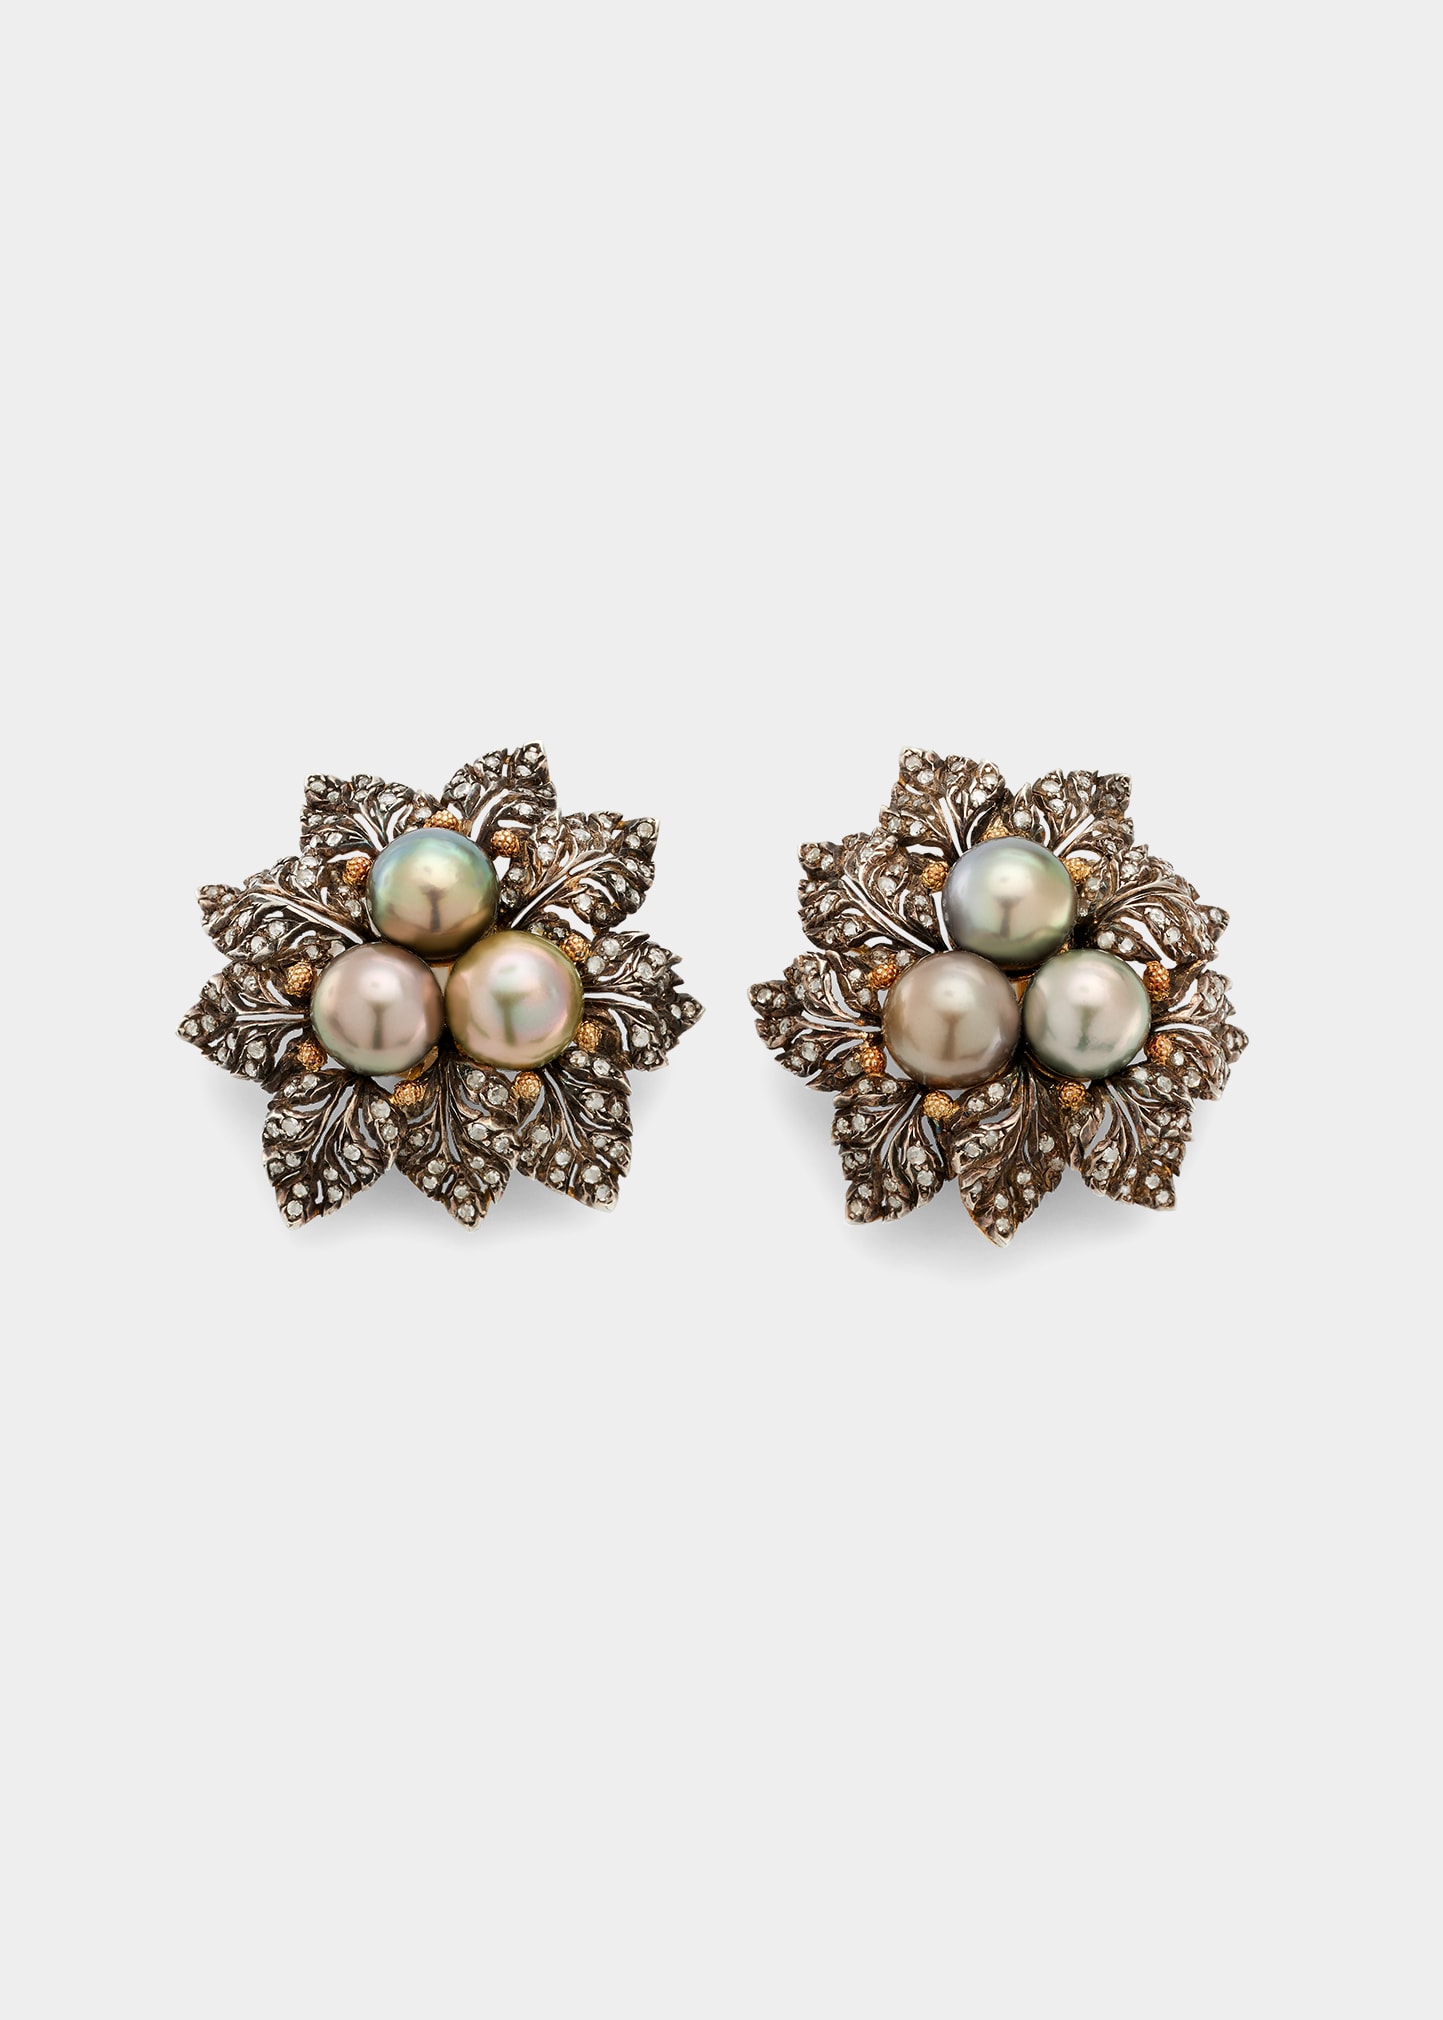 One-of-a-Kind Yellow Gold and Silver Earrings with Rose-Cut Diamonds and 10mm Tahitian Pearls